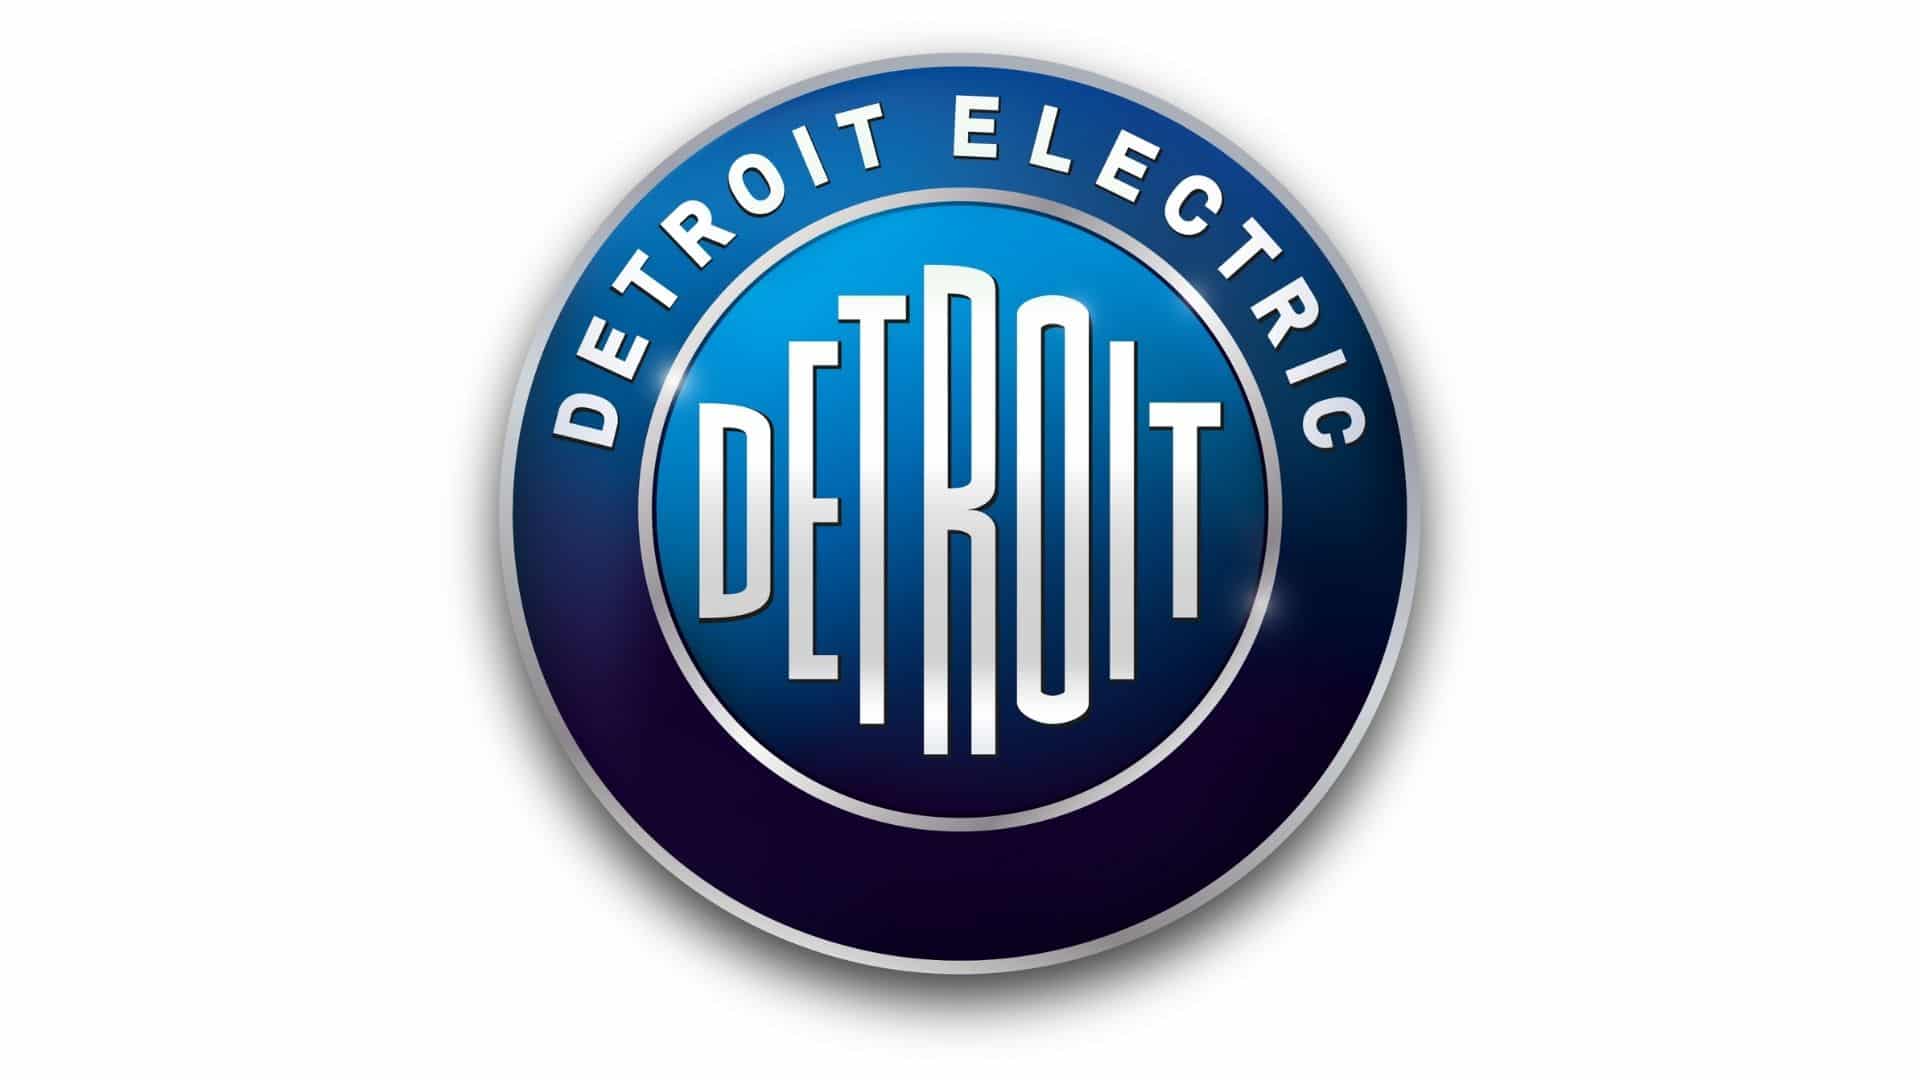 Detroit Electric secures major investment to expand its future vehicle offerings